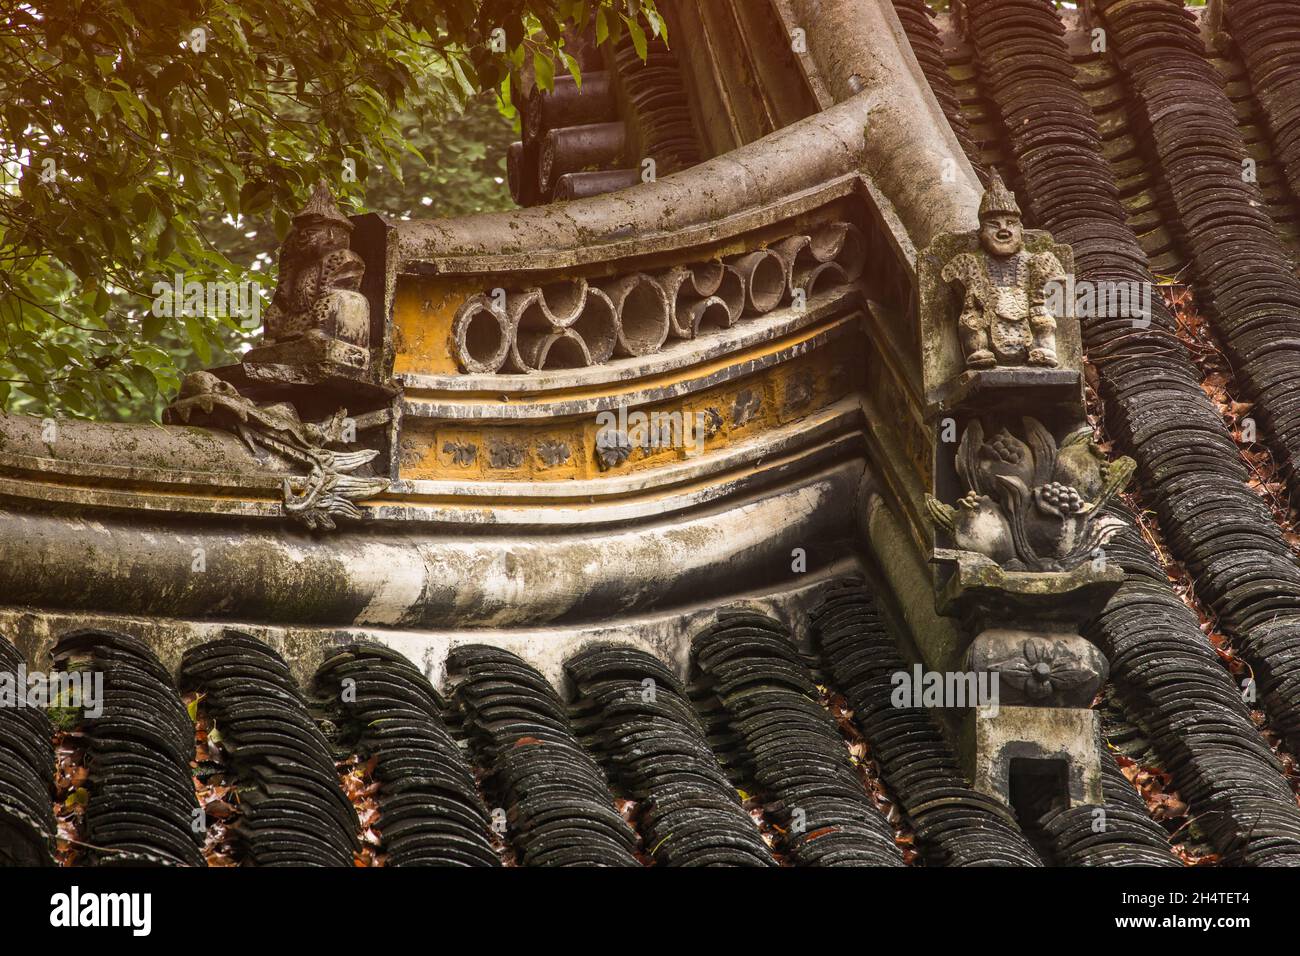 Architectural detail of a pavilion on Tiger Hill in Suzhou, China. Stock Photo